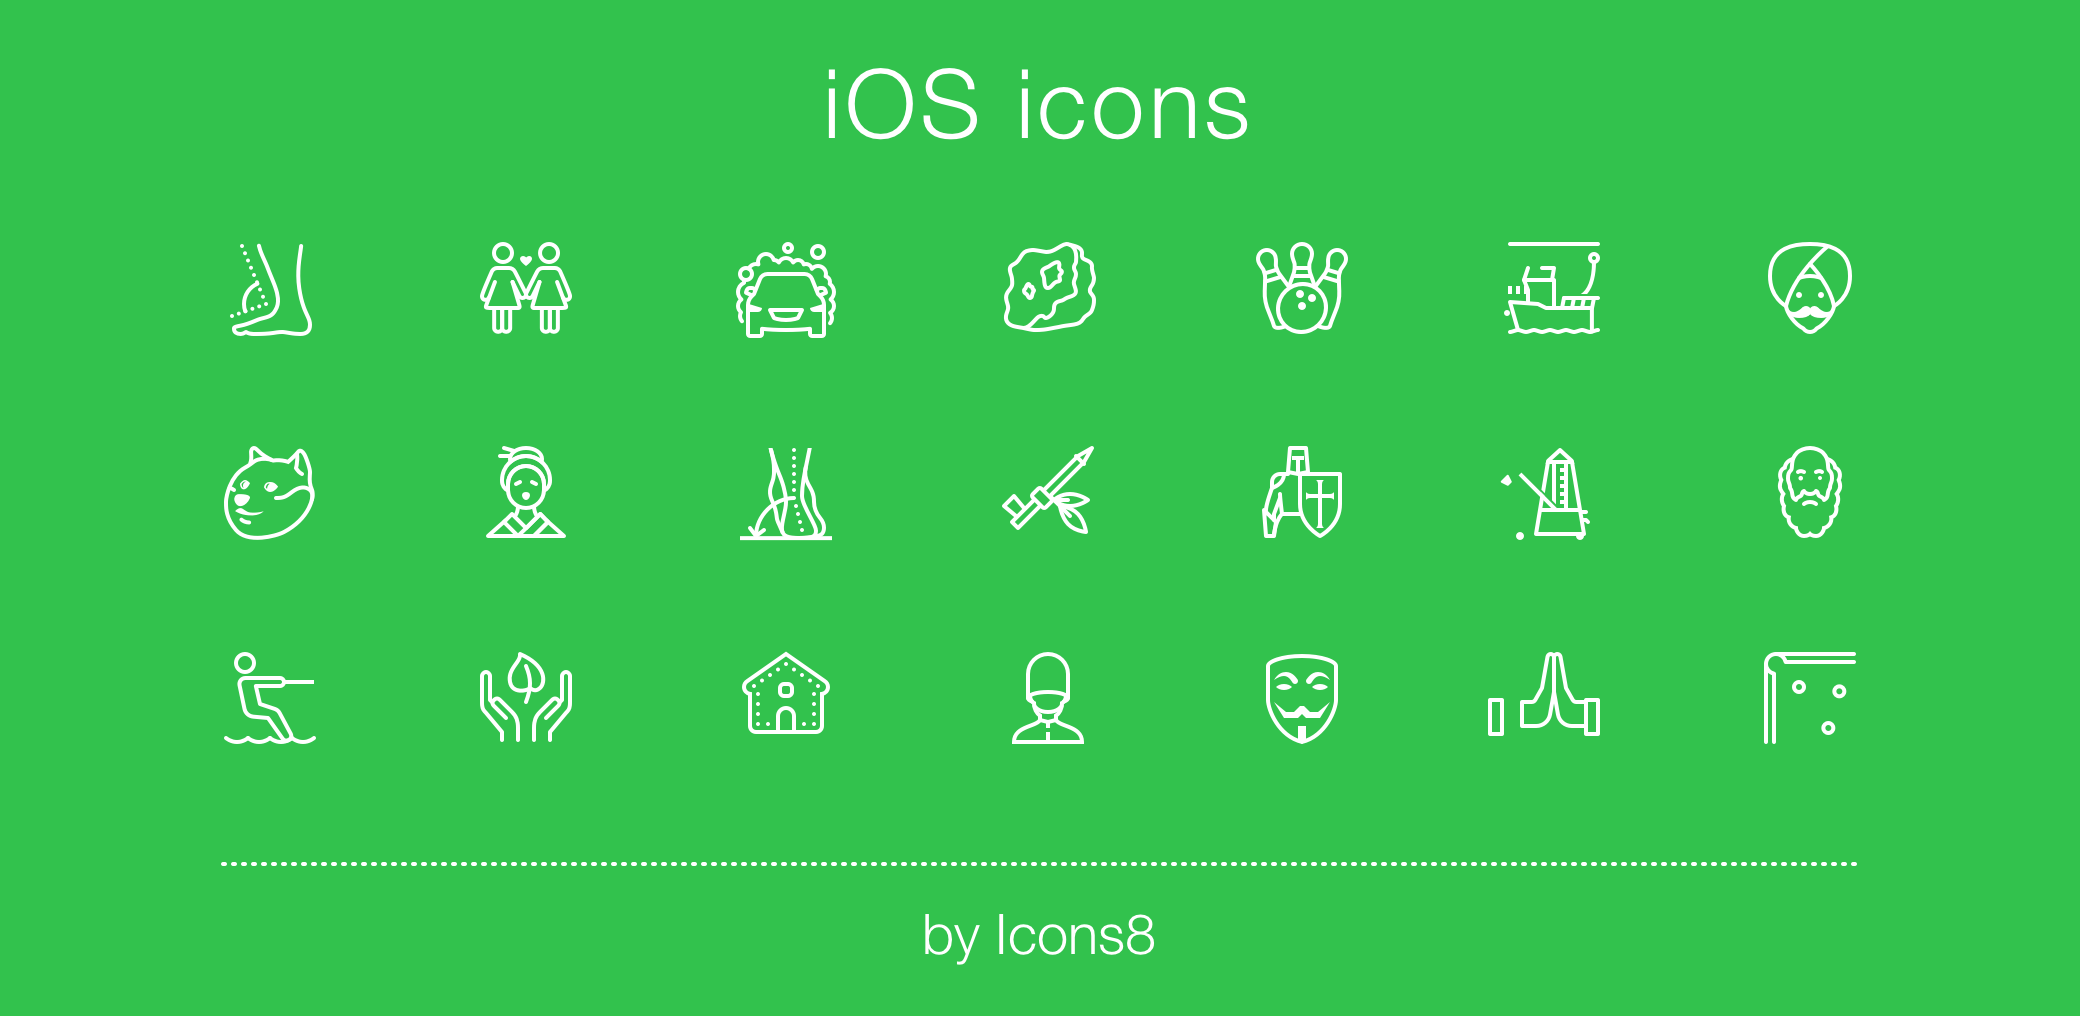 Touching Up Apples iOS 7 Icon Set | The Happy Mac Blog